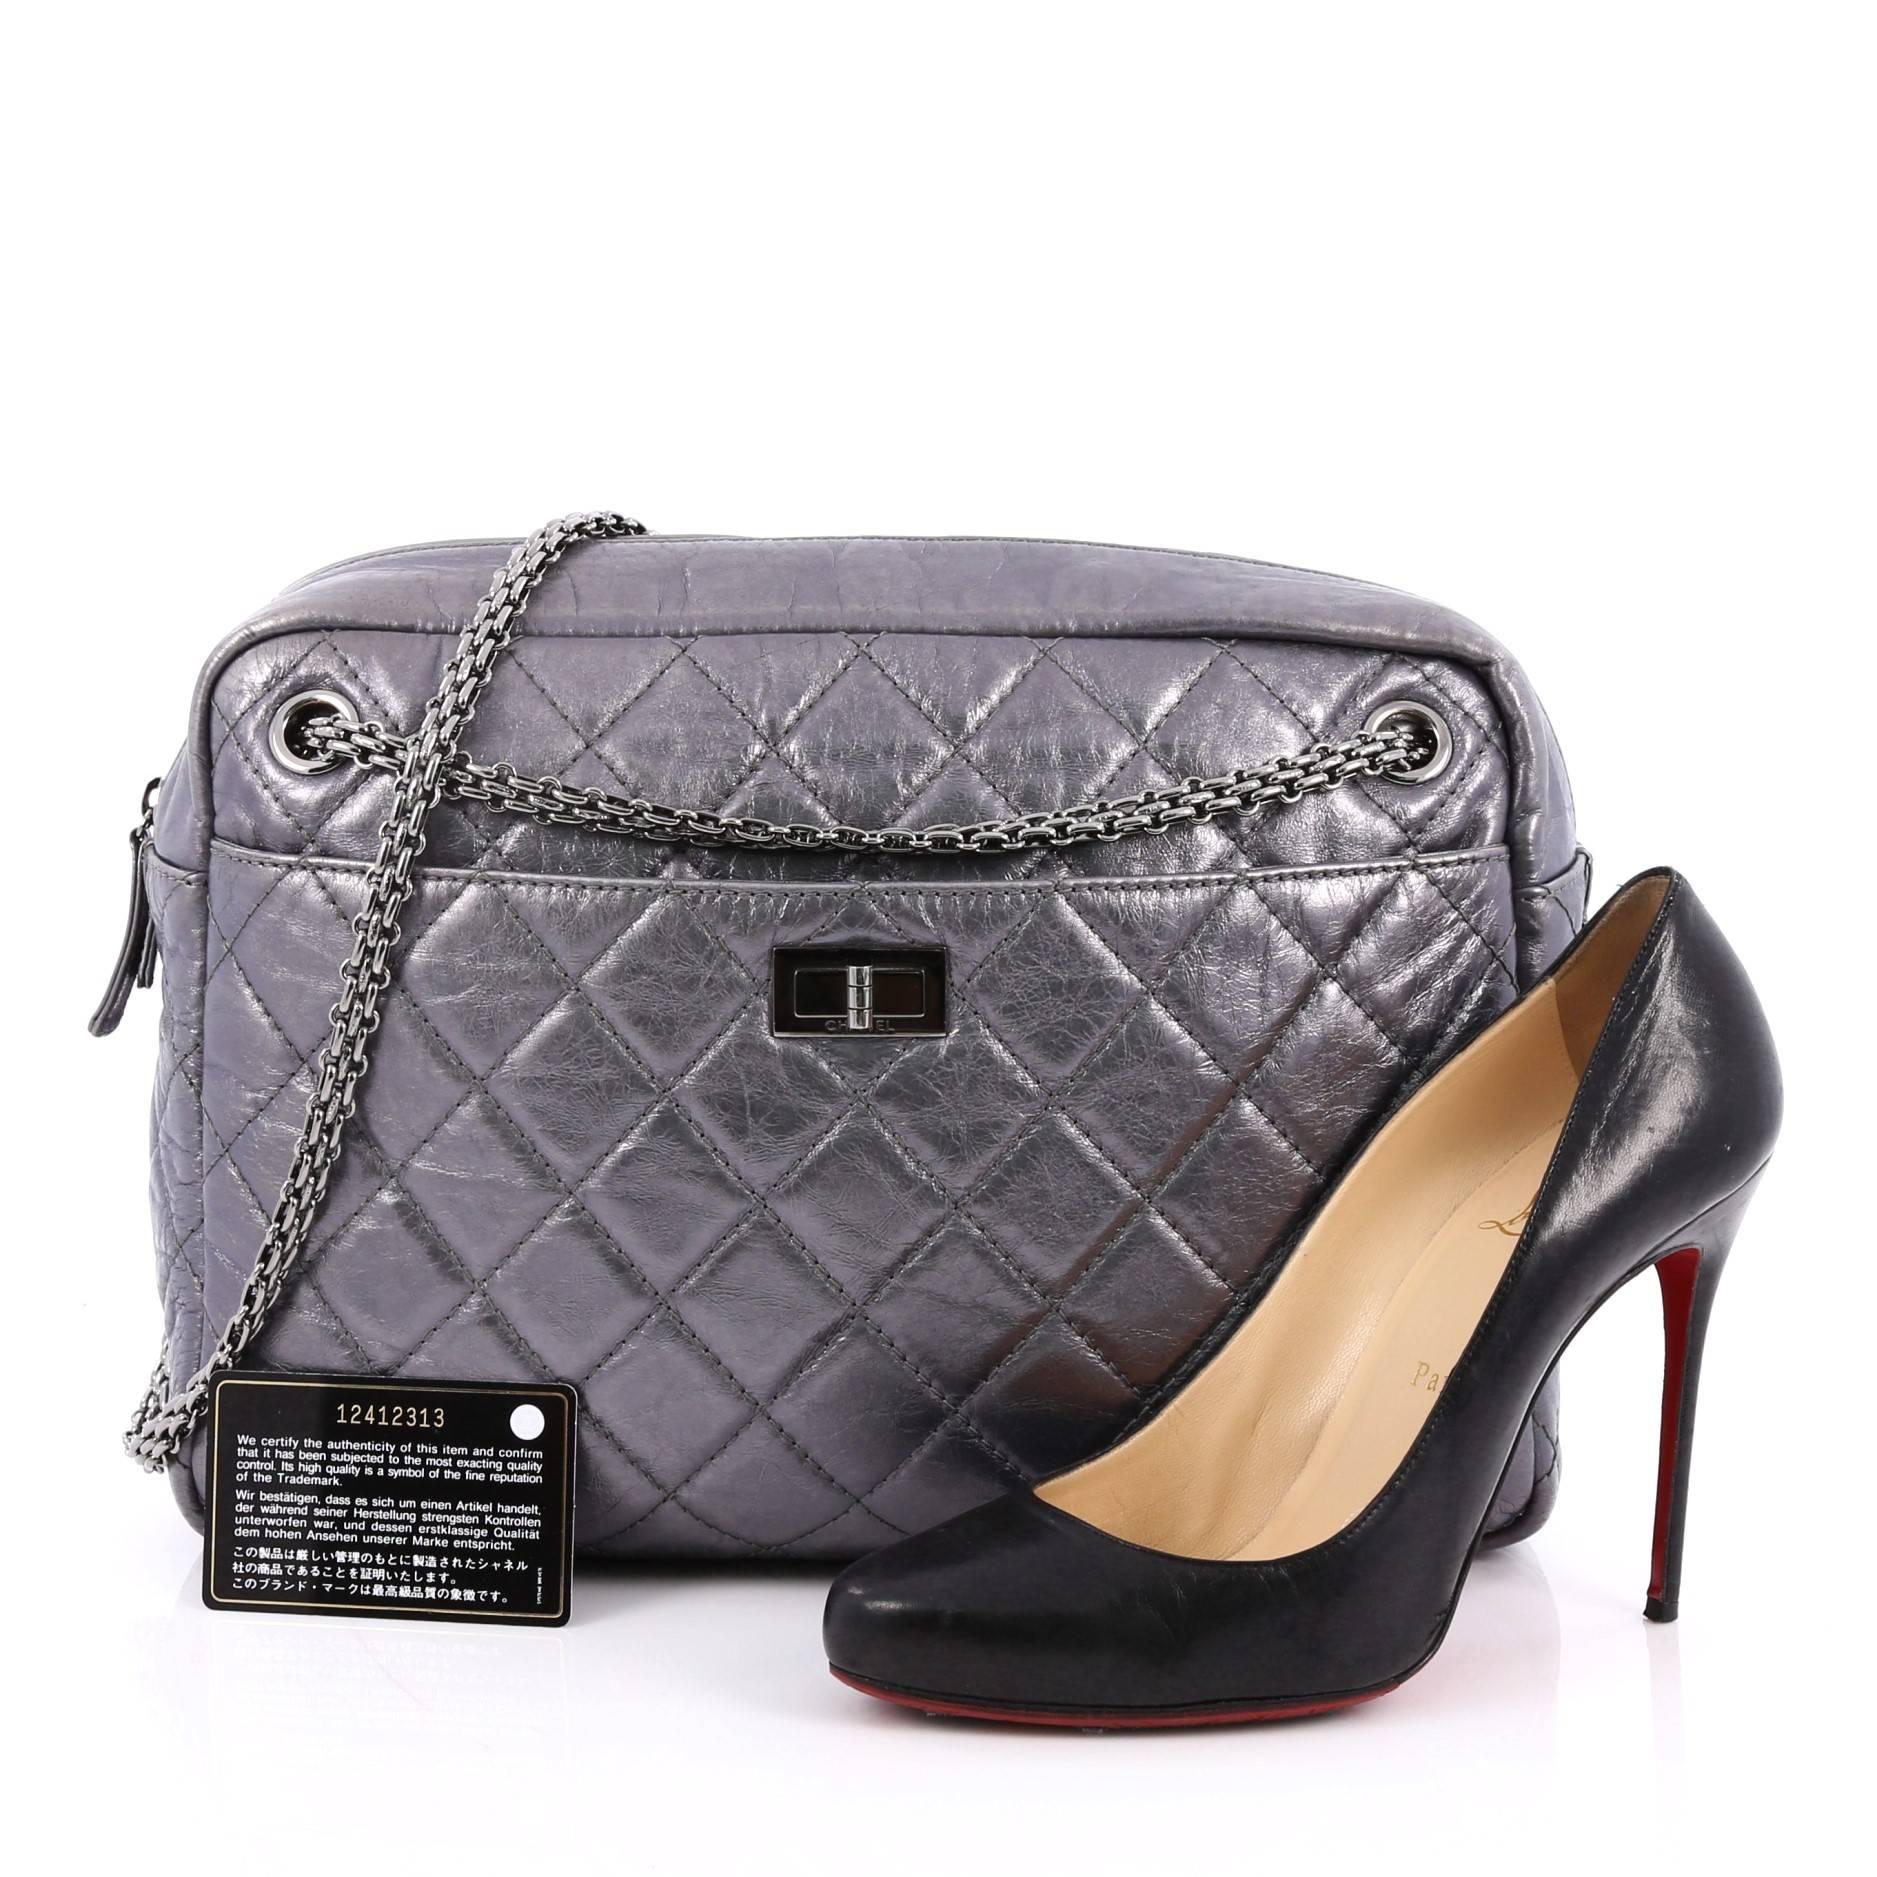 This authentic Chanel Reissue Camera Bag Quilted Aged Calfskin Large is a timeless and iconic piece made for any fashionista. Crafted in metallic silver diamond quilted calfskin leather, this camera-style bag features iconic silver bijoux chain